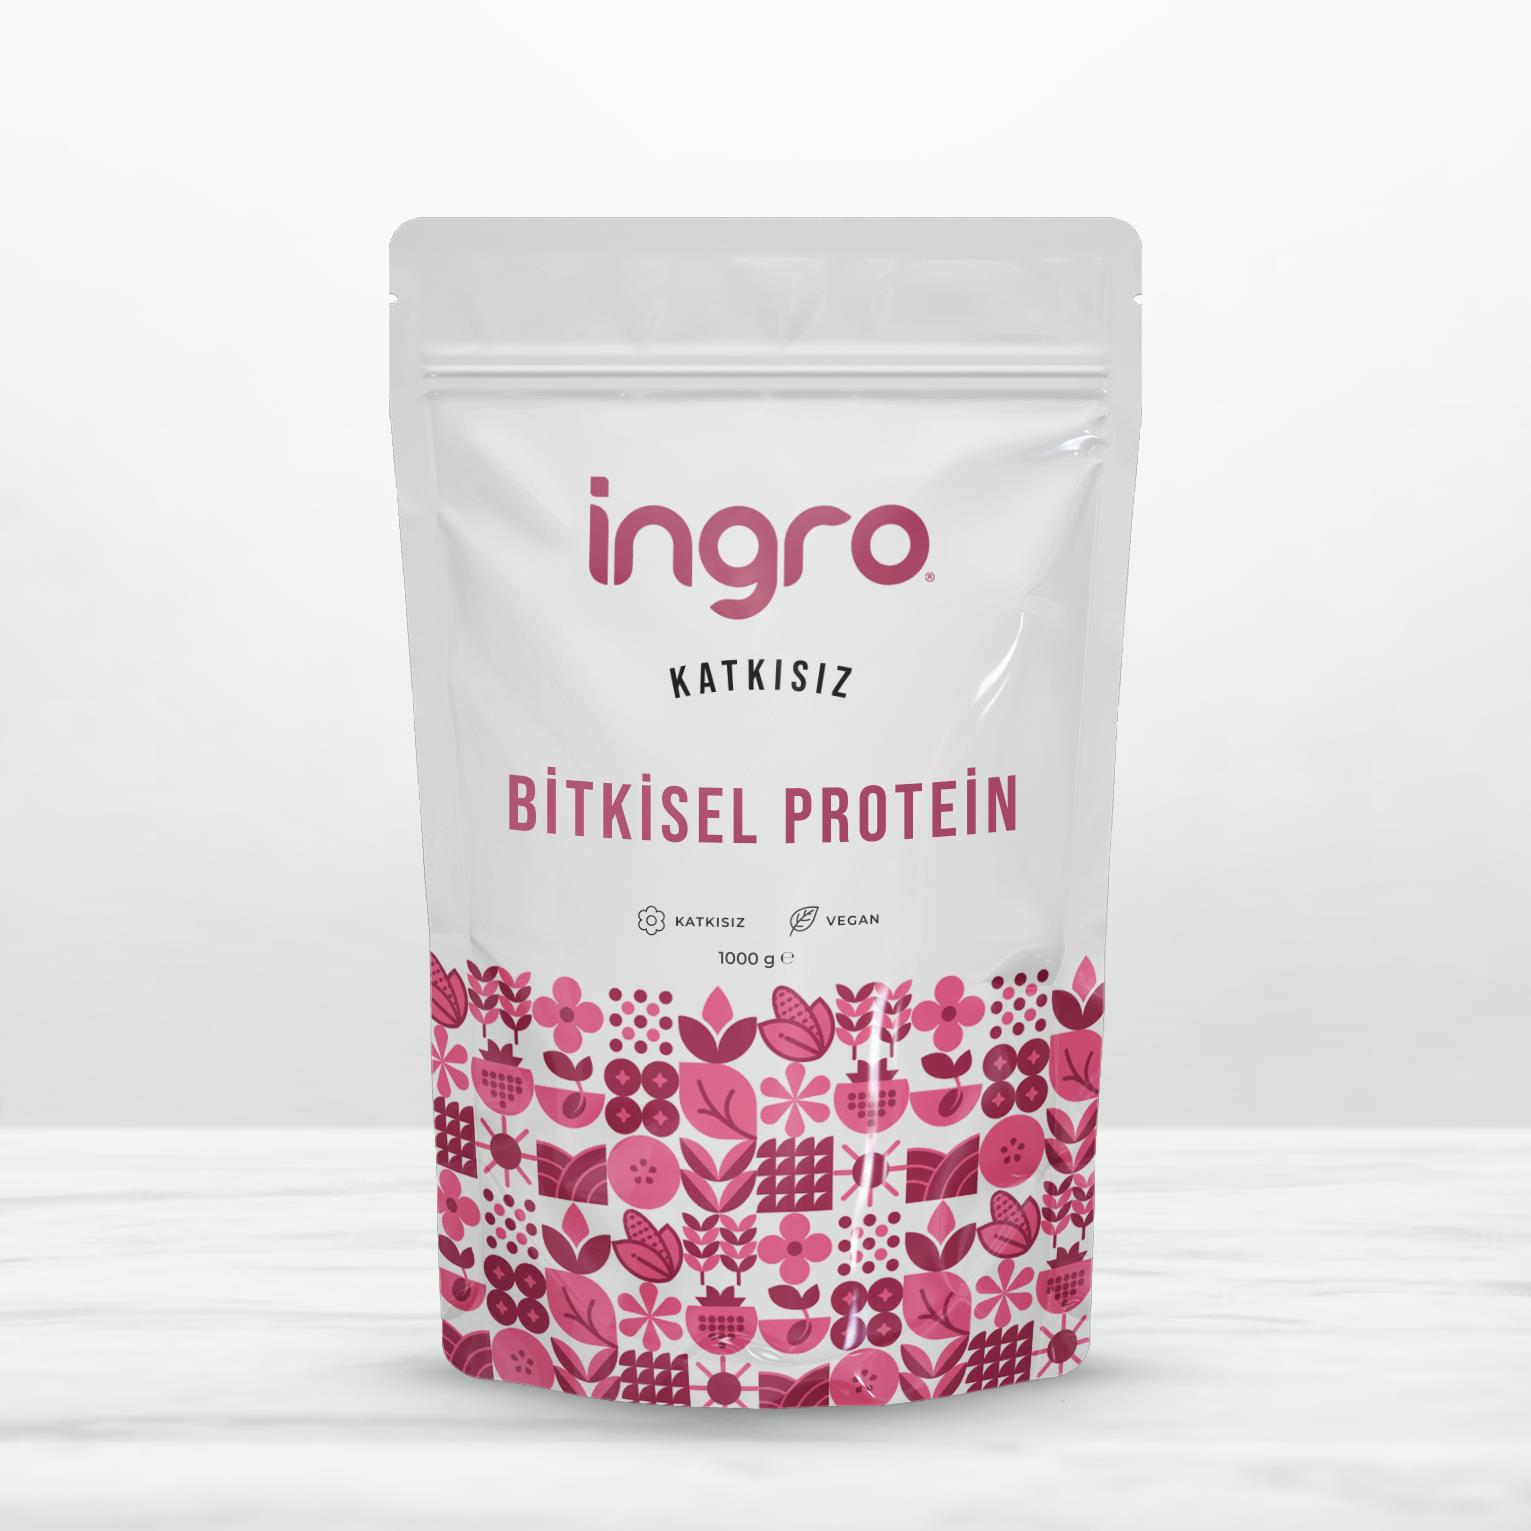 Bitkisel Protein 1000 g